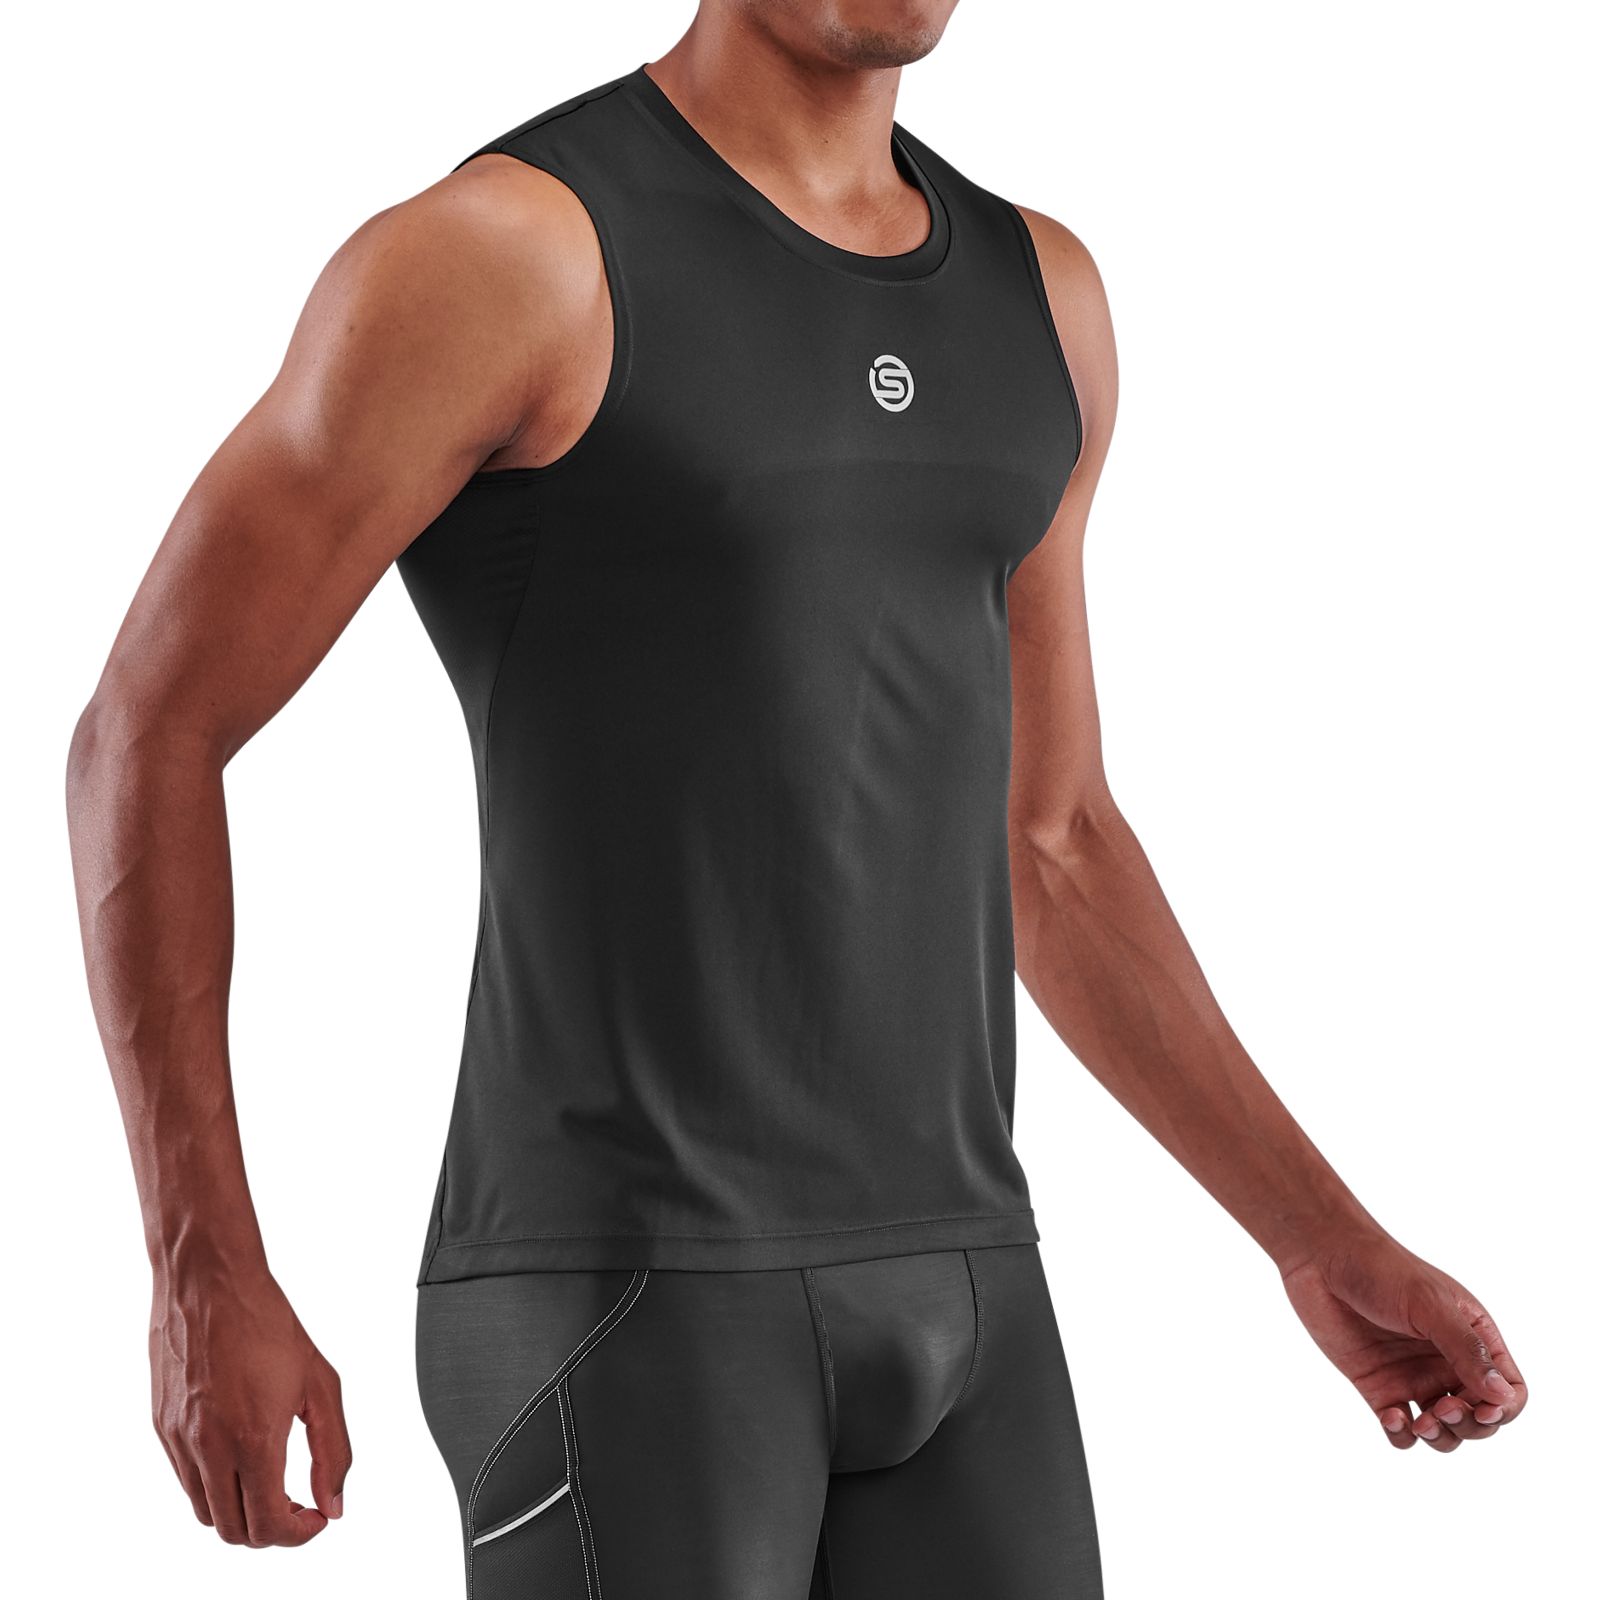 Skins Compression Top Men's Black New without Tags